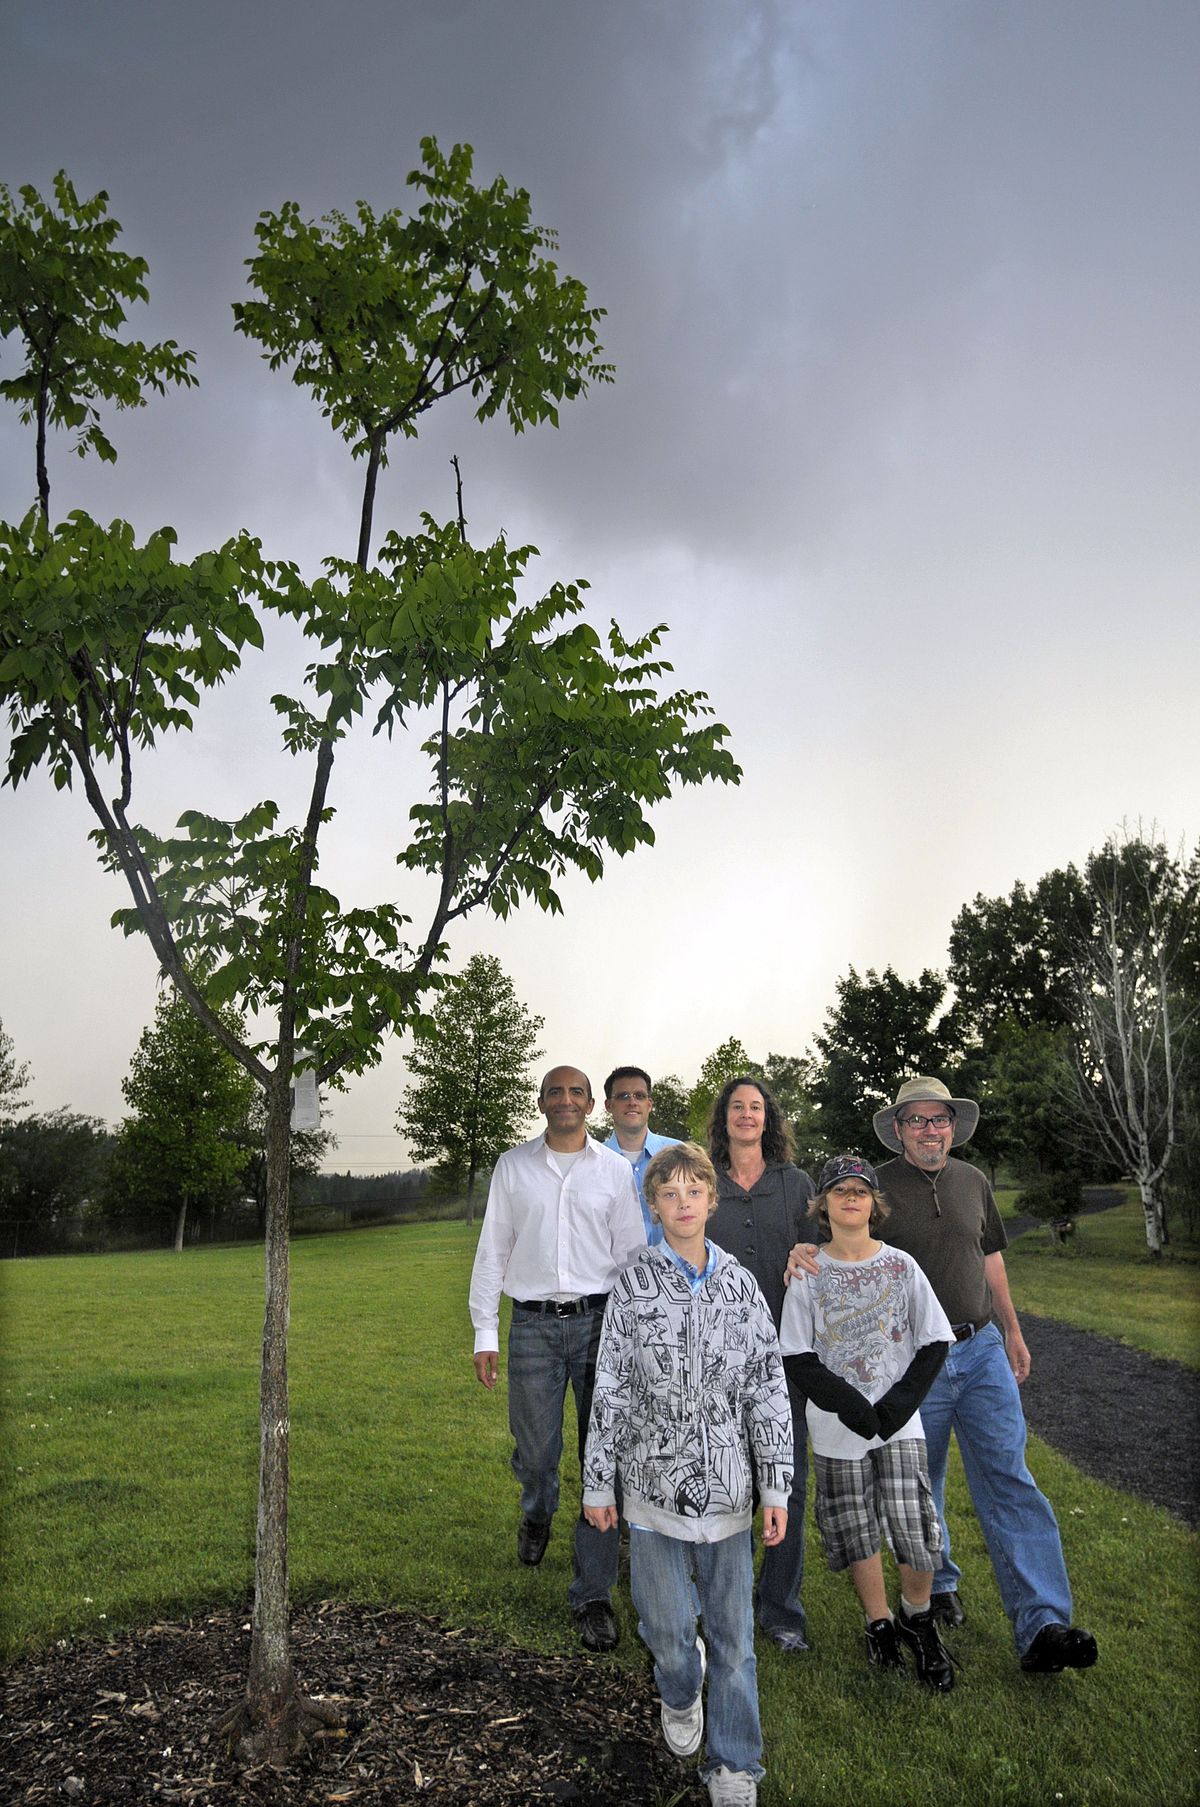 A group of Spokane residents walk past a “peace tree” planted in Polly Judd Park by Iranian bike tourists last year. The group reciprocated by traveling to Iran to plant peace trees in that country. From left, Shahrokh Nikfar, Jon Snyder, Jackson Snyder, Pam Deutschman, Zak Deutschman and Tom Deutschman. (CHRISTOPHER ANDERSON / The Spokesman-Review)